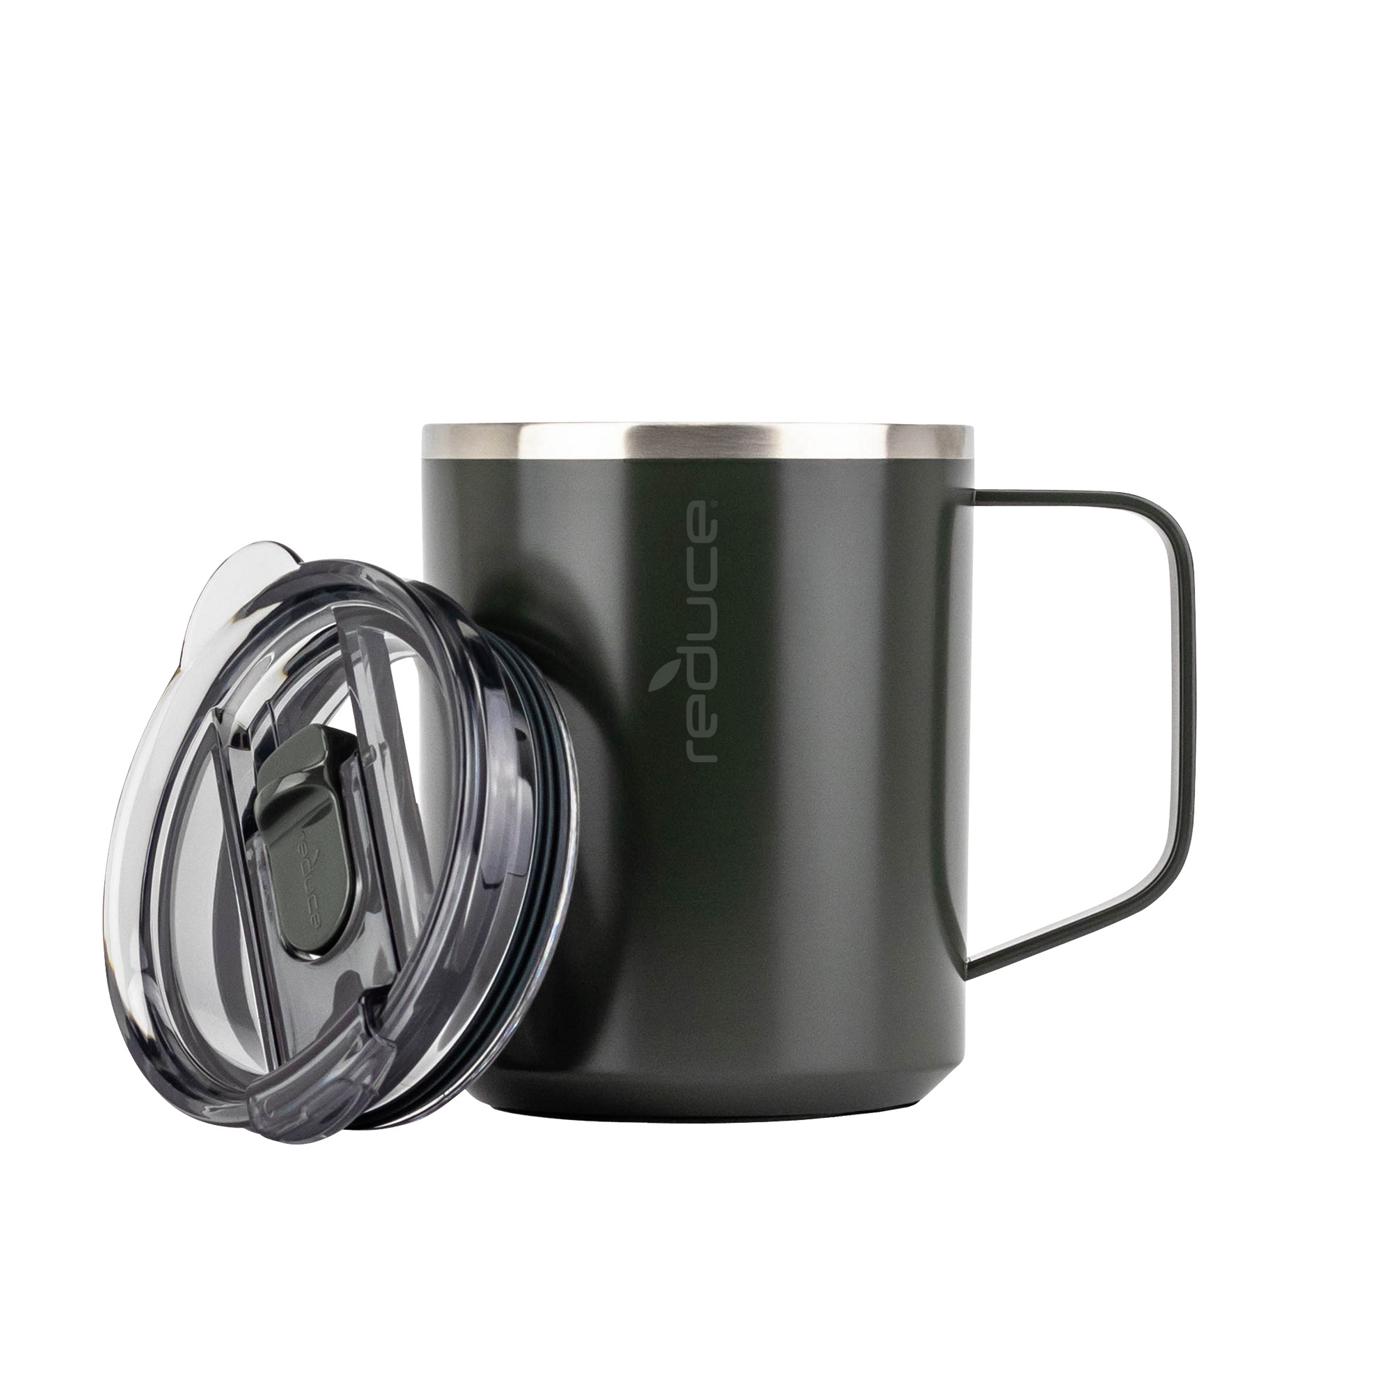 Reduce Stone Stainless Steel Hot1 Travel Mug - Shop Travel & To-Go at H-E-B